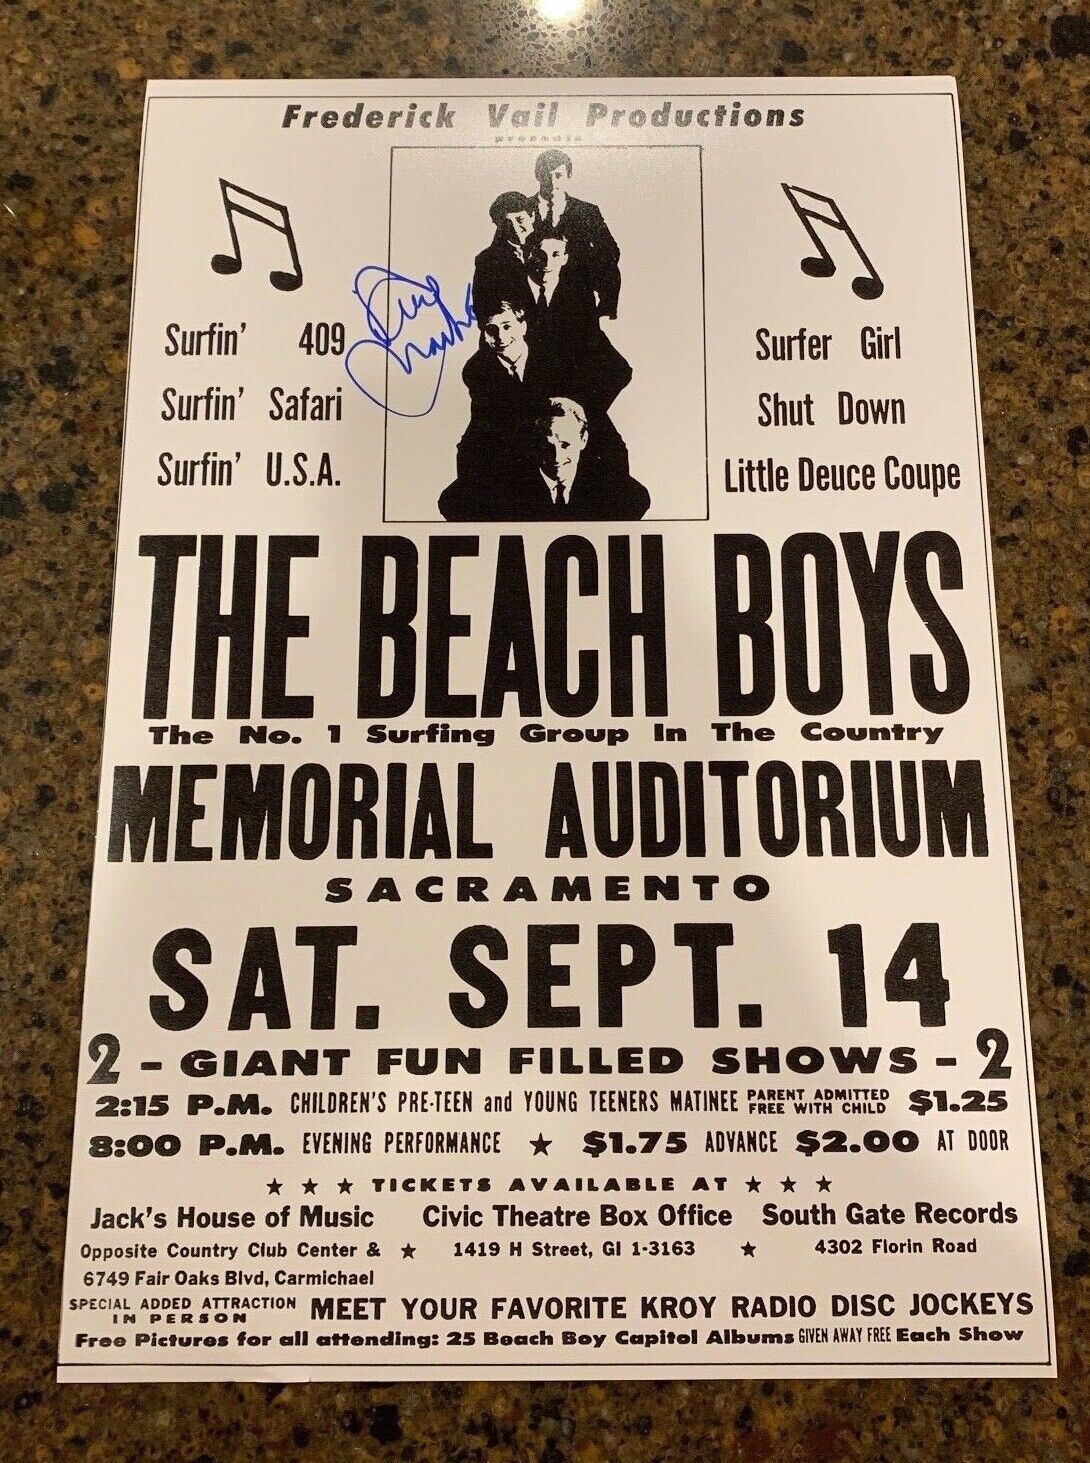 * DAVID MARKS * signed 12x18 concert poster * THE BEACH BOYS 1963 * PROOF * 3